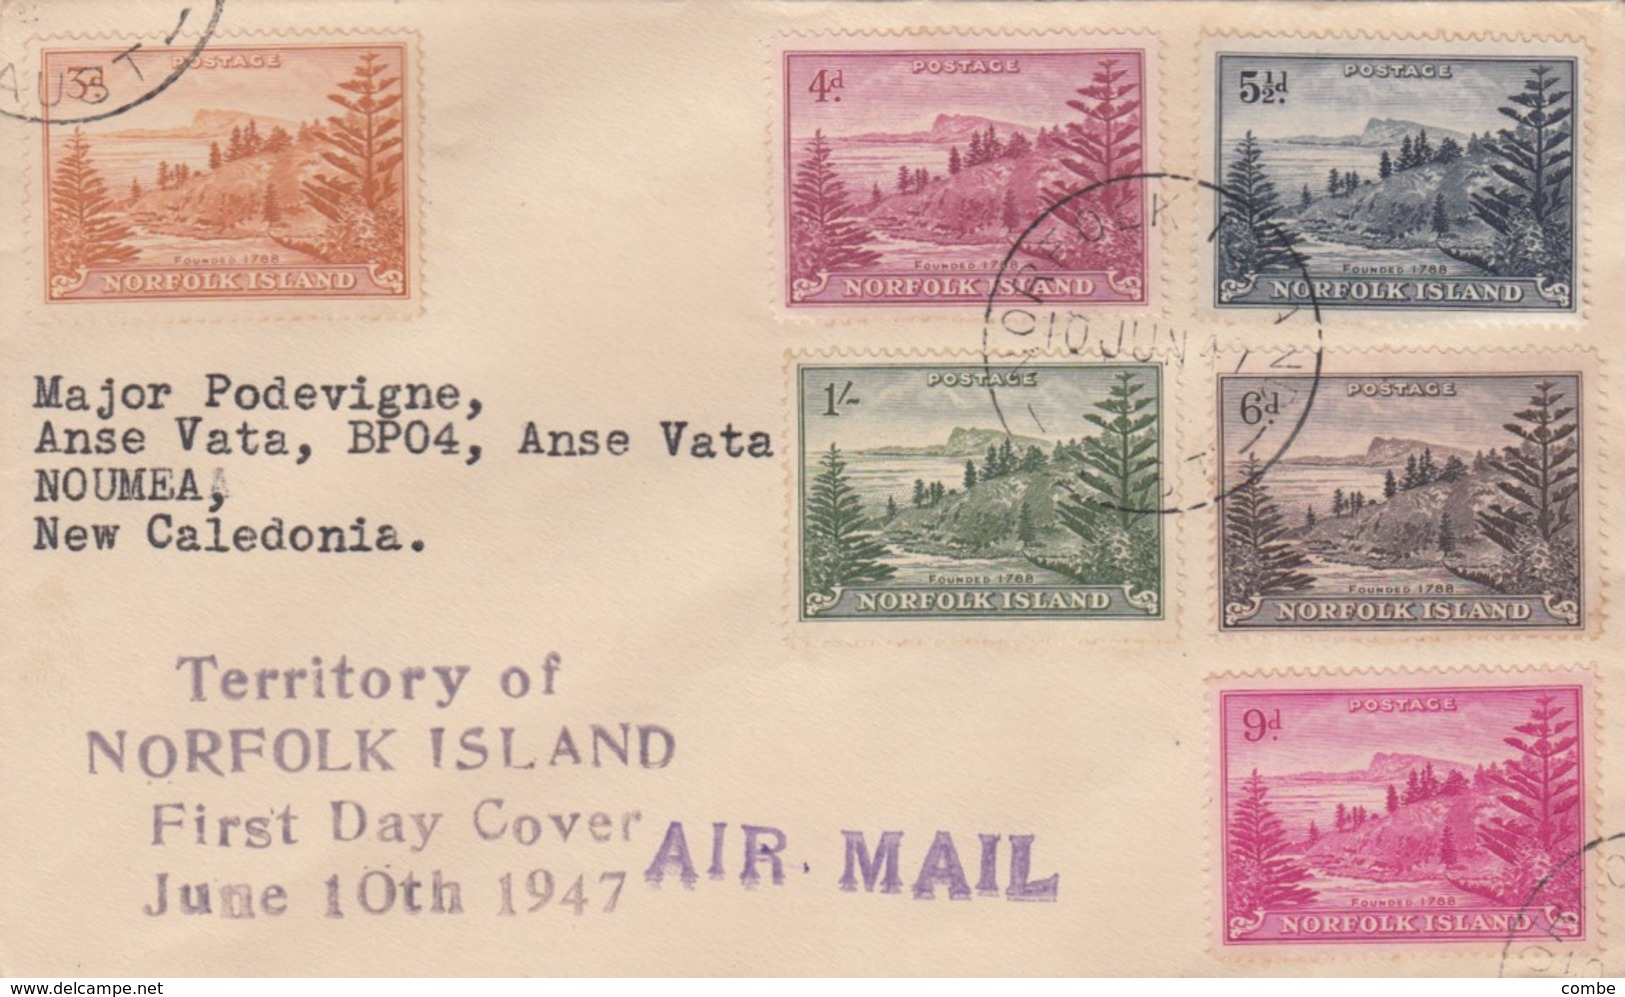 COVER. AIR MAIL. NORFOLK ISLAND. 10 JUN 47. FDC. TO NOUMEA NOUVELLE CALEDONIE - Norfolk Eiland